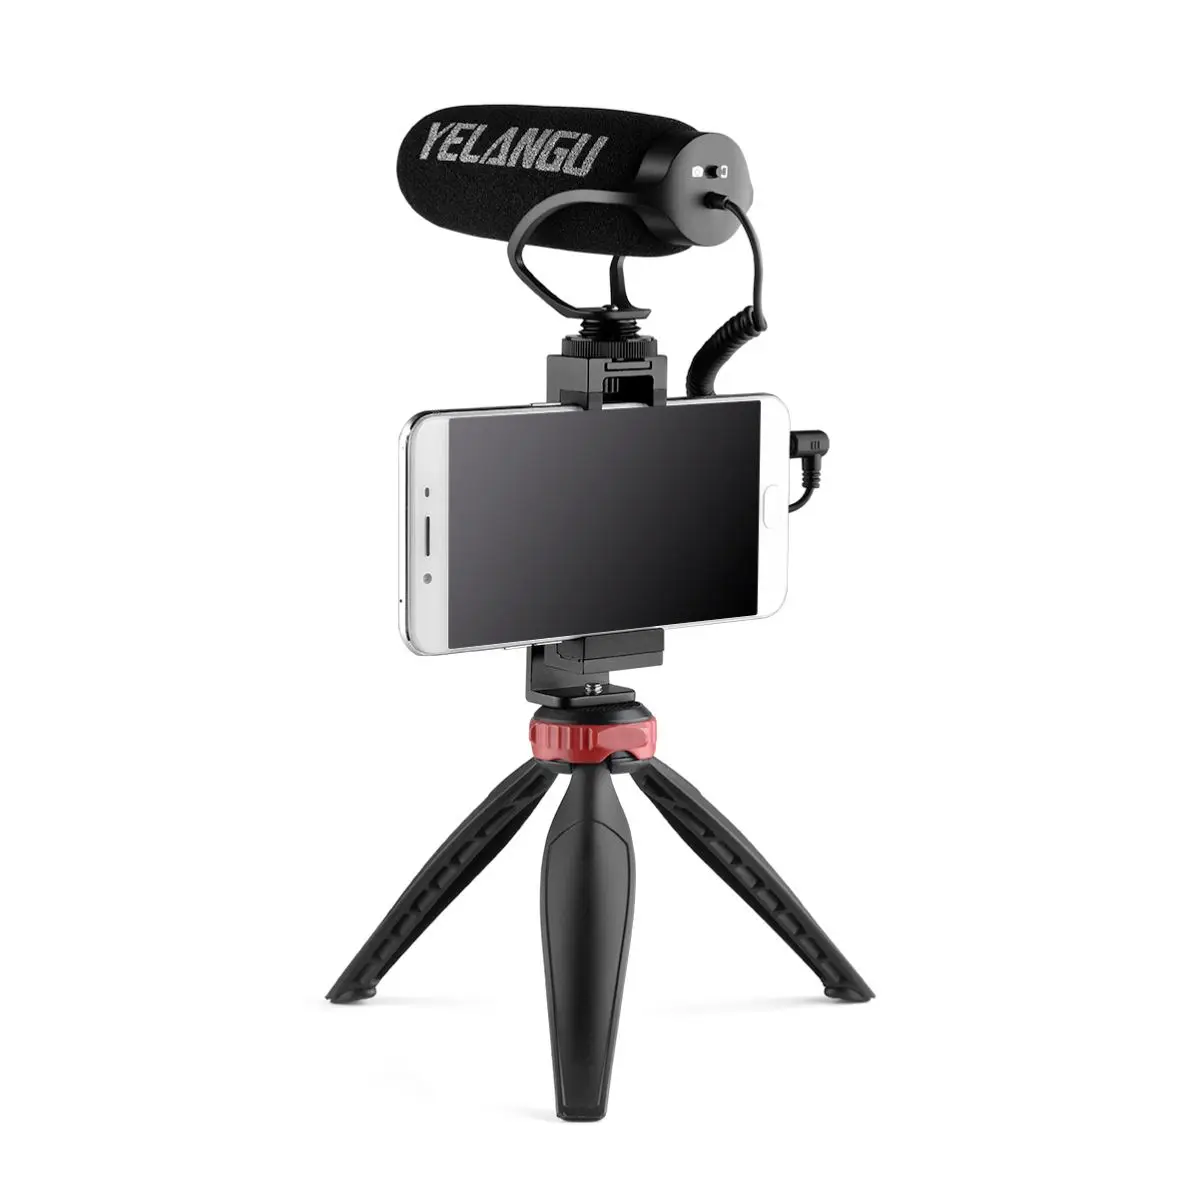 

Professional video Recording Microphone for Camera DSLR and Smartphone live broadcast interview